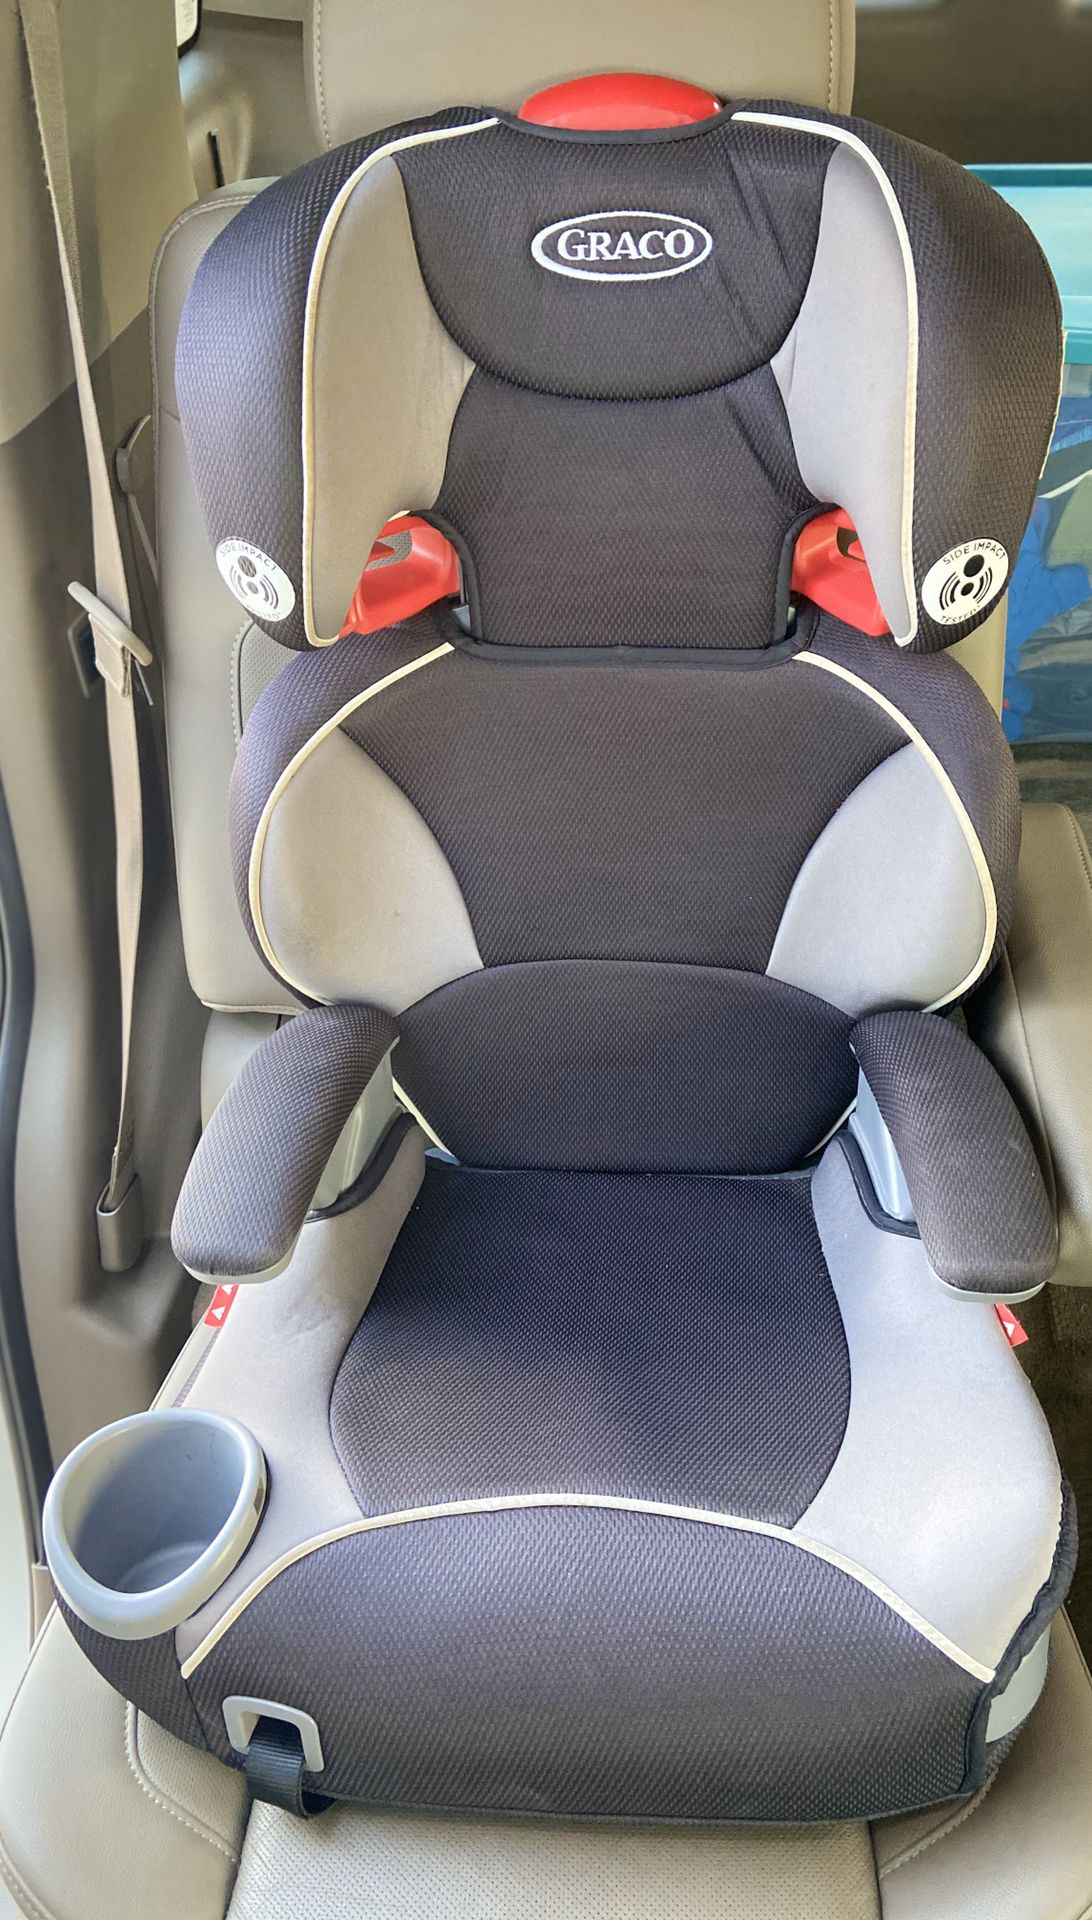 Graco Highback Booster Car Seat